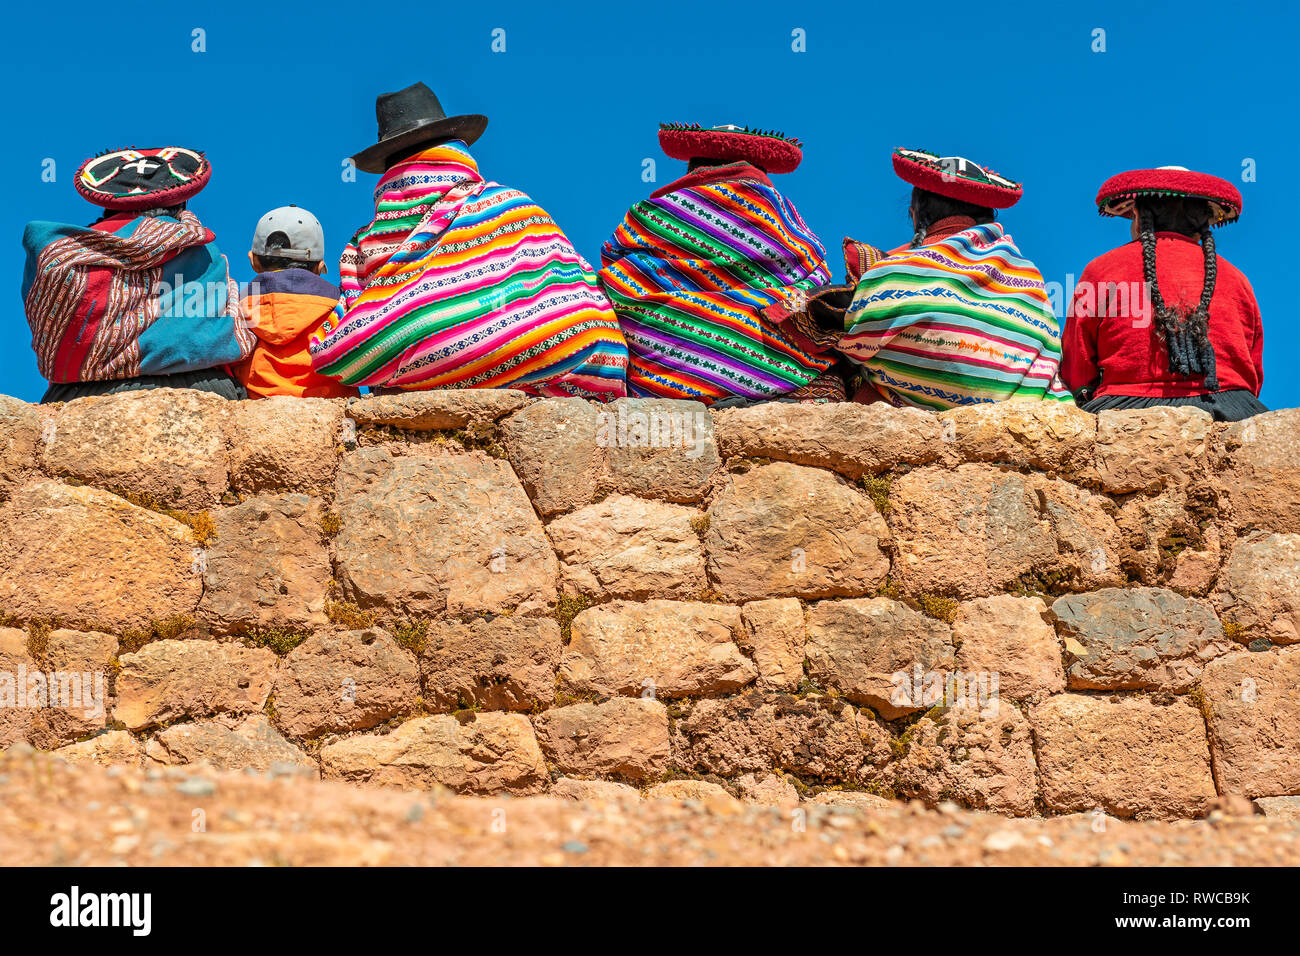 Indigenous Peruvian Quechua women in traditional clothing with a boy sitting on an ancient Inca wall in the ruin of Chinchero, Cusco province, Peru. Stock Photo